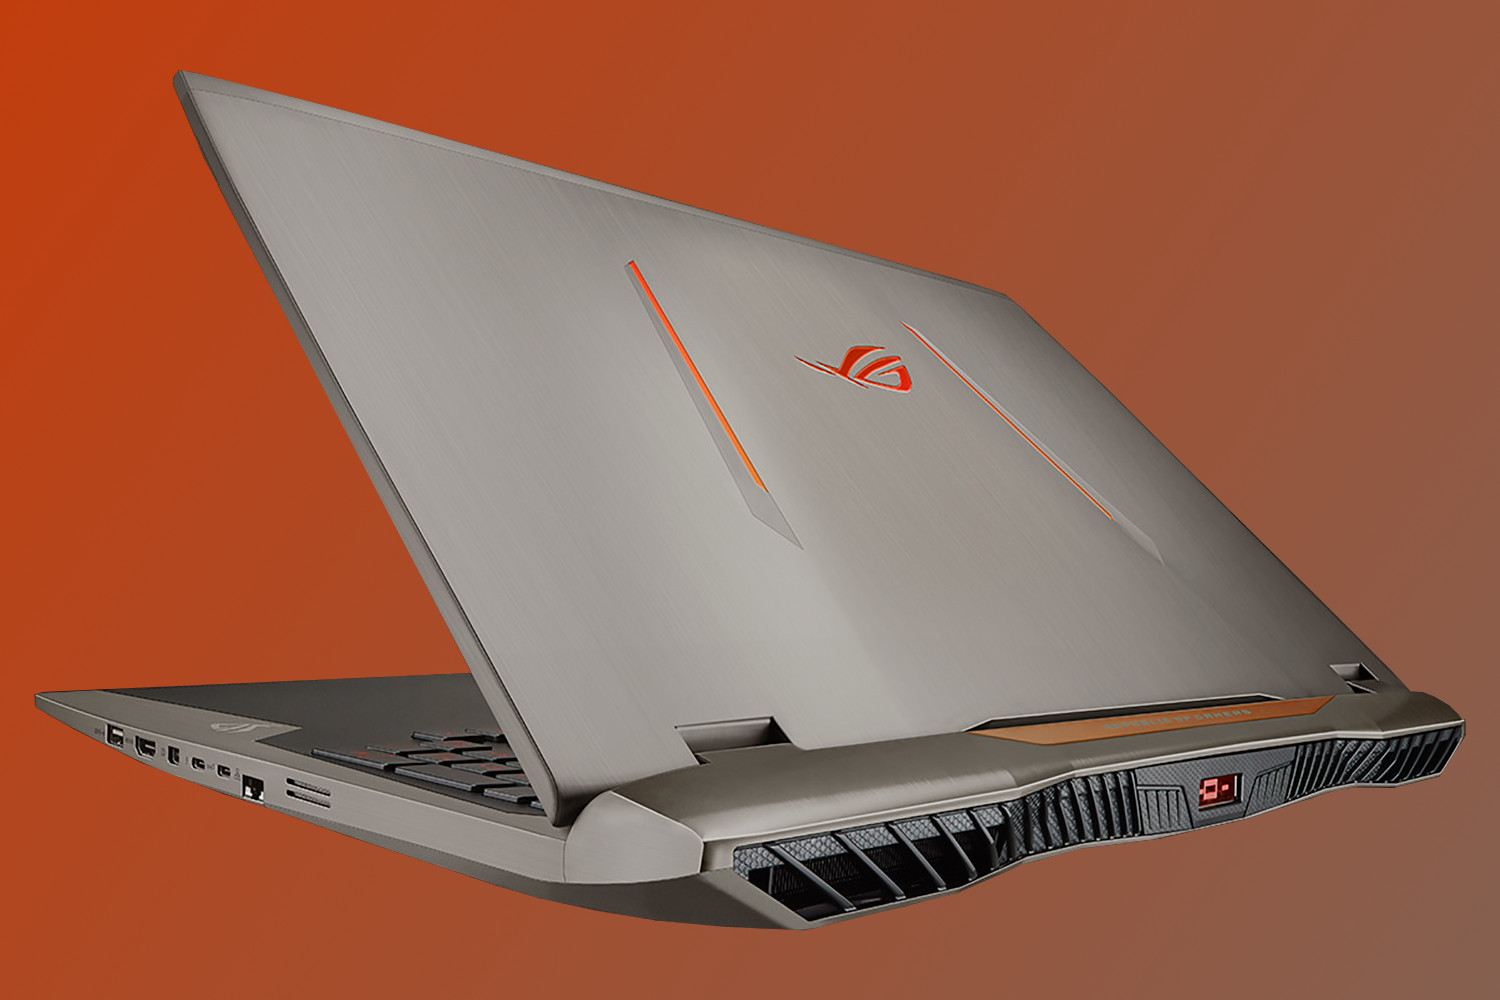 Asus ROG G701VI Laptop Appears On Amazon for $3,100 | Digital Trends